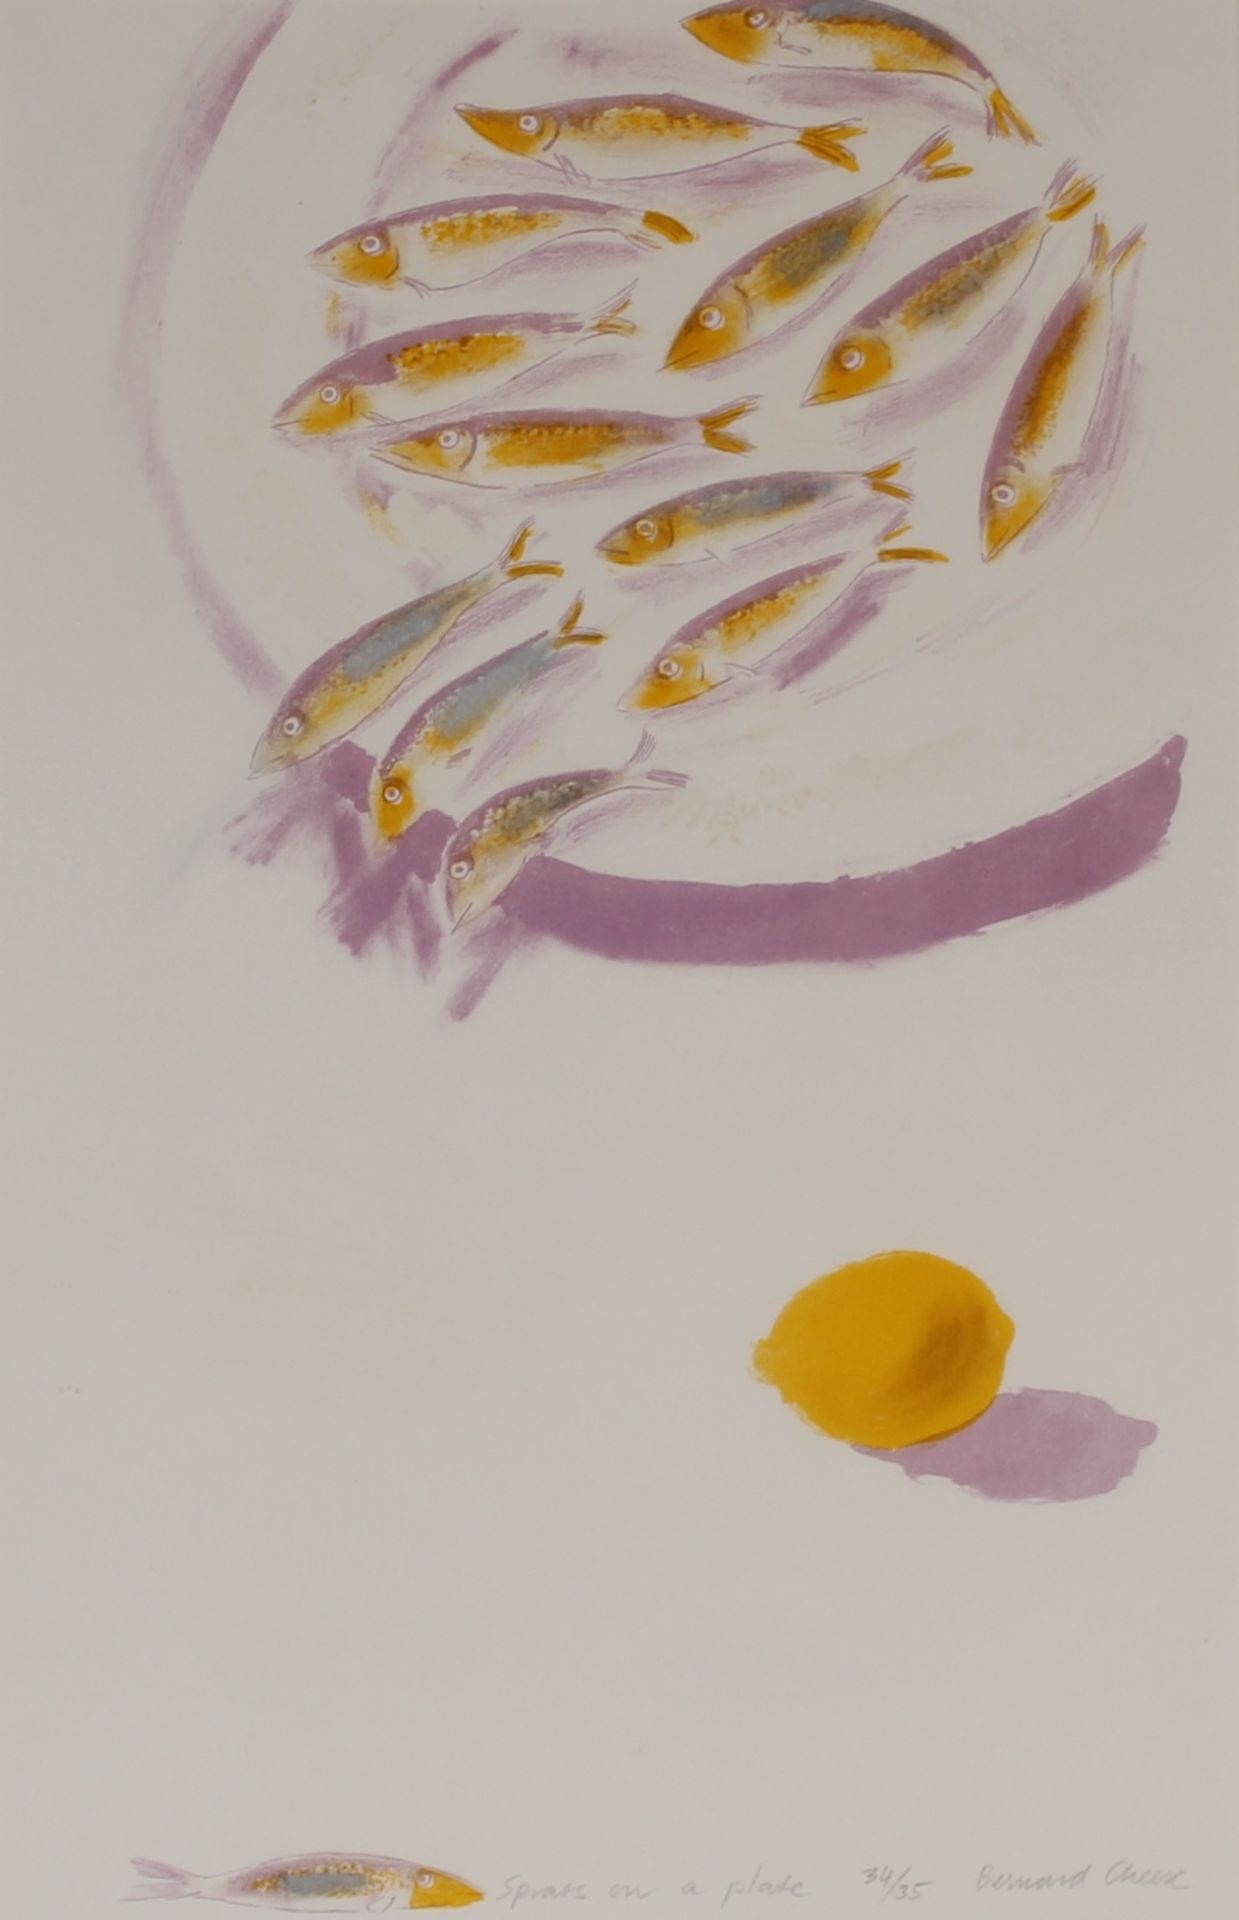 Bernard Cheese, "Sprats On A Plate", limited edition lithograph, 34/35, 53.5cm x 34.5cm